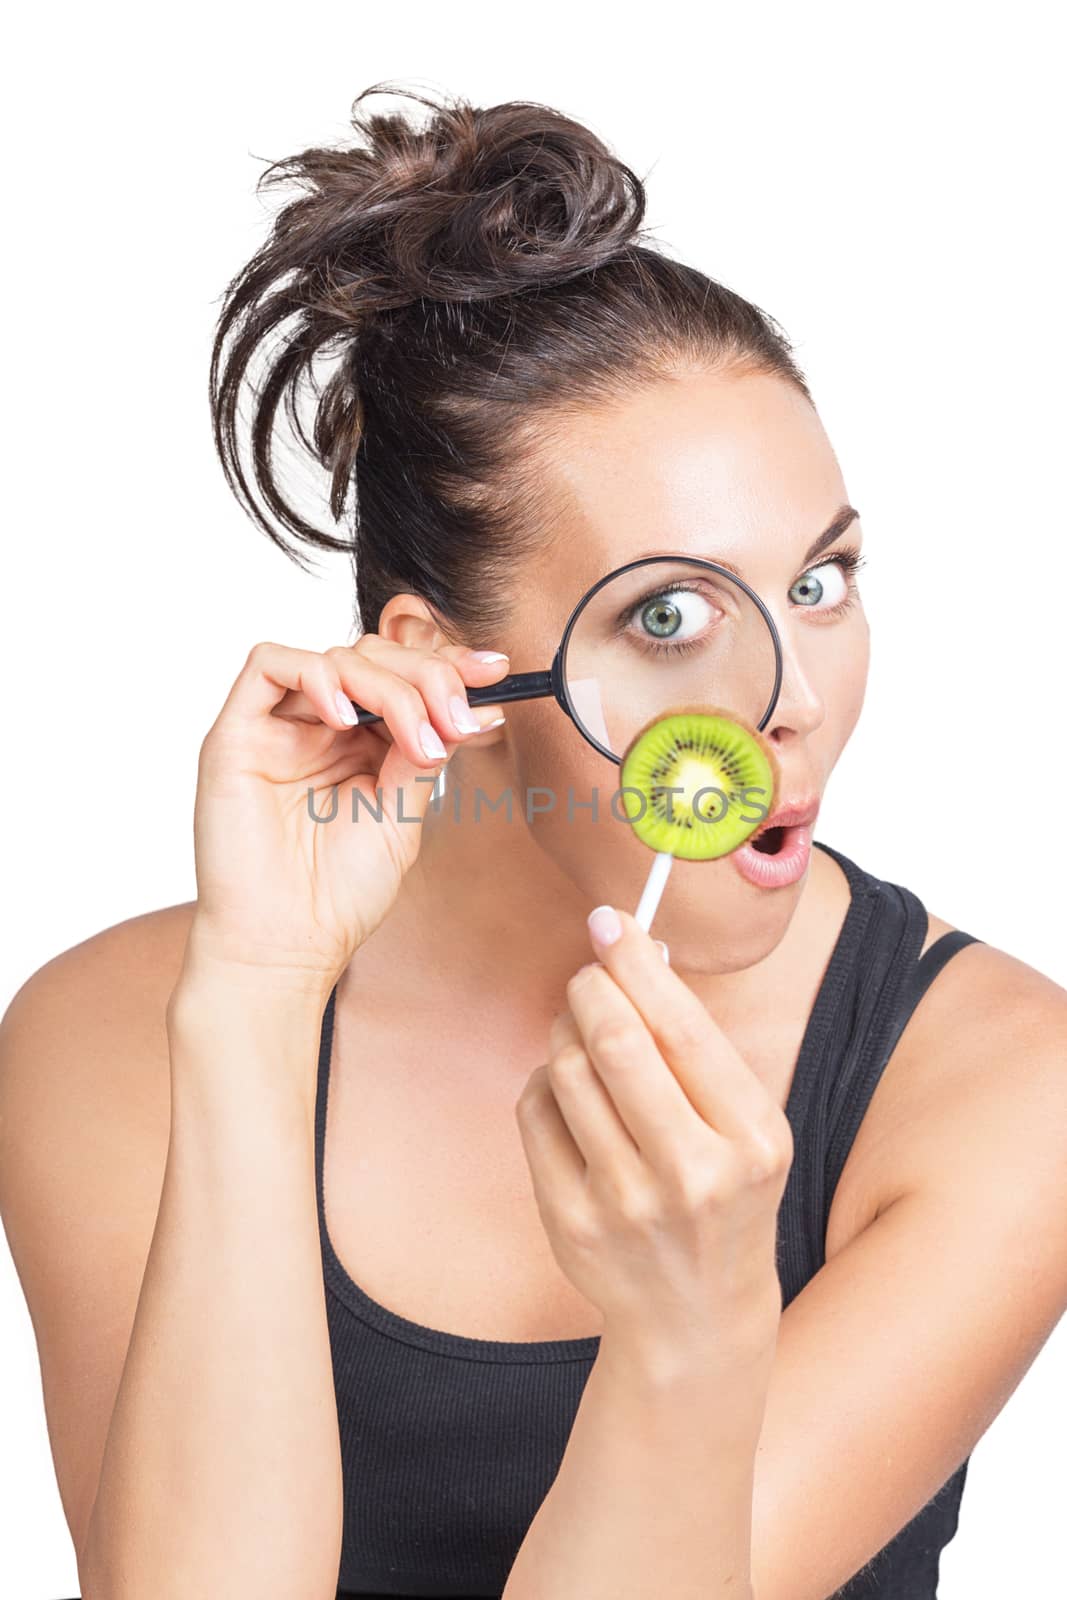 Woman looking at kiwi slice through magnifying lens, isolated on white background